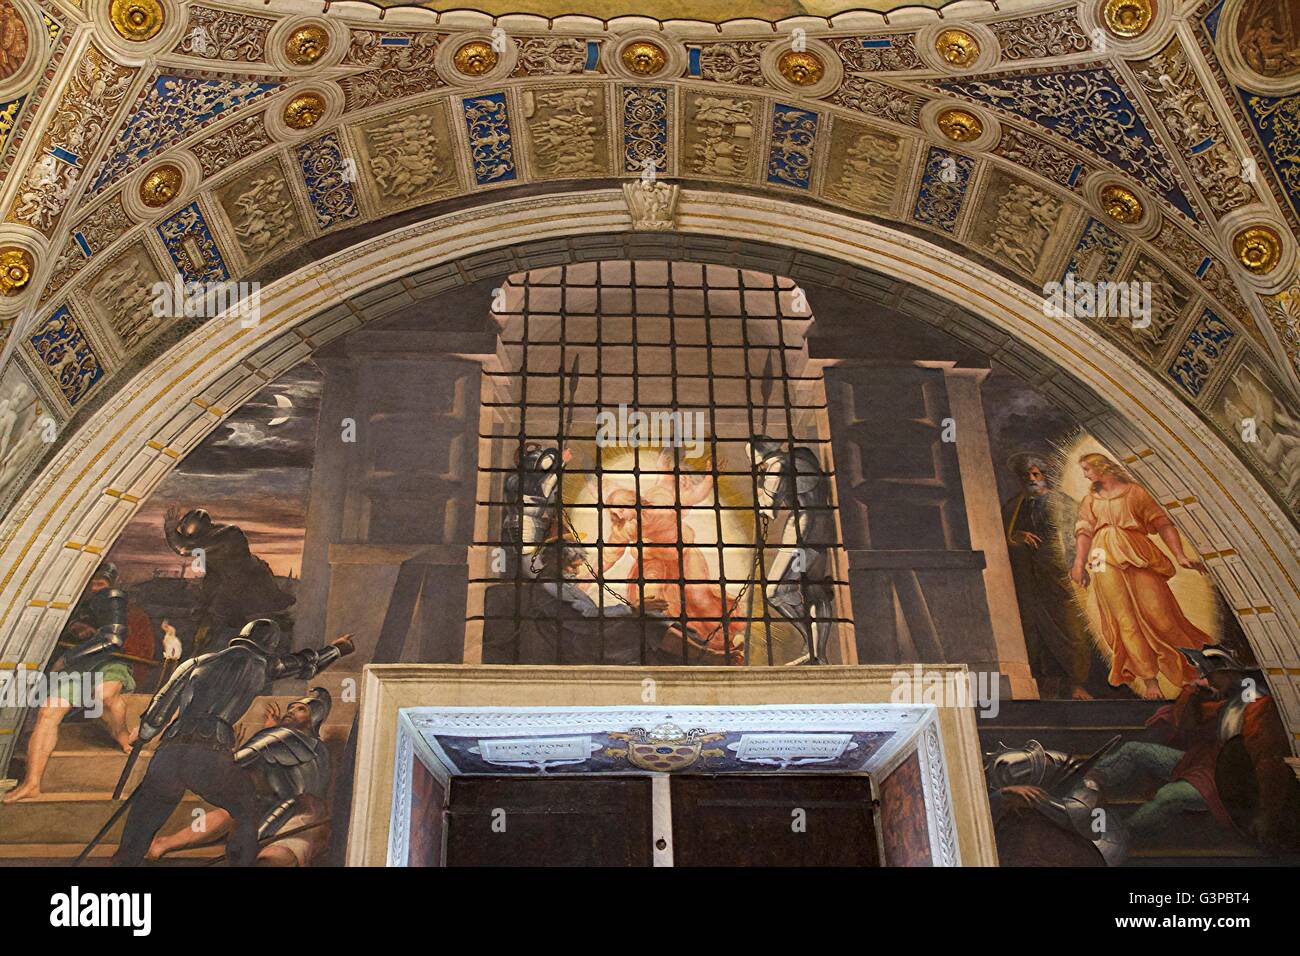 Deliverance of St Peter, 1514, Room of Heliodorus, Raphael Rooms, Apostolic Palace, Vatican Museums, Rome, Italy Stock Photo